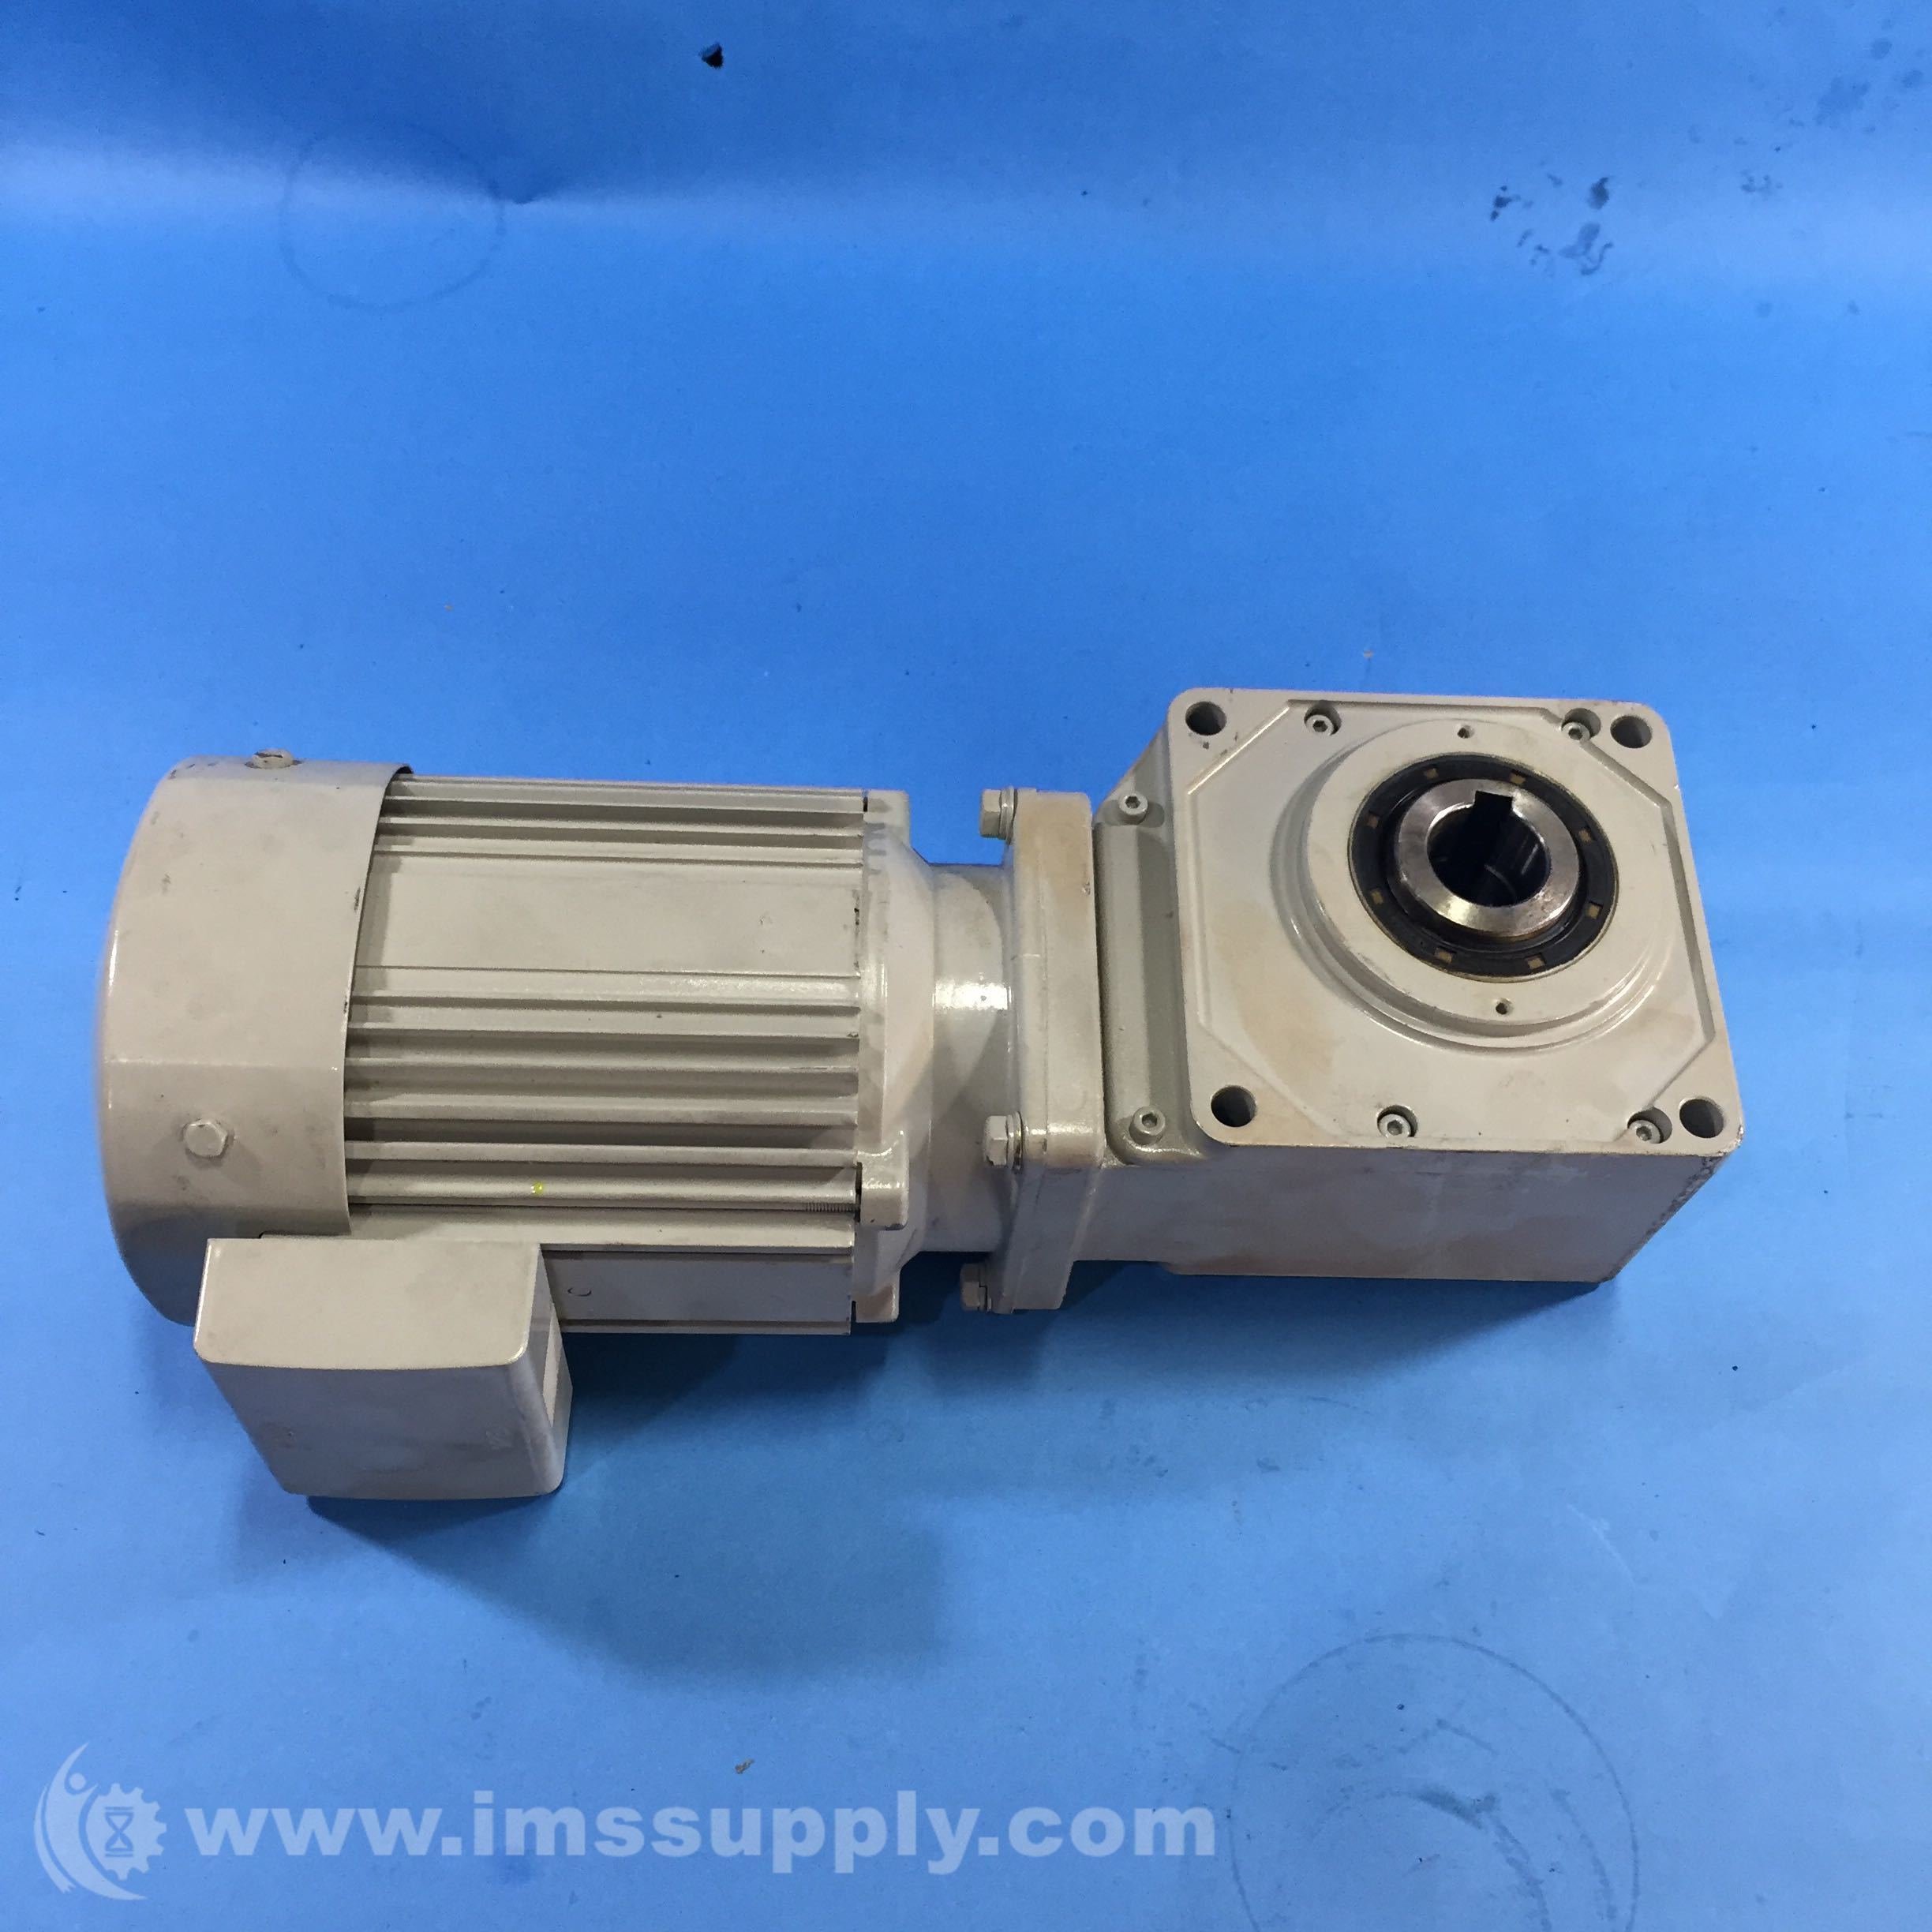 1800 RPM USIP Details about   Sumitomo RNFM01-20RY-40 Hyponic Drive Gearmotor 